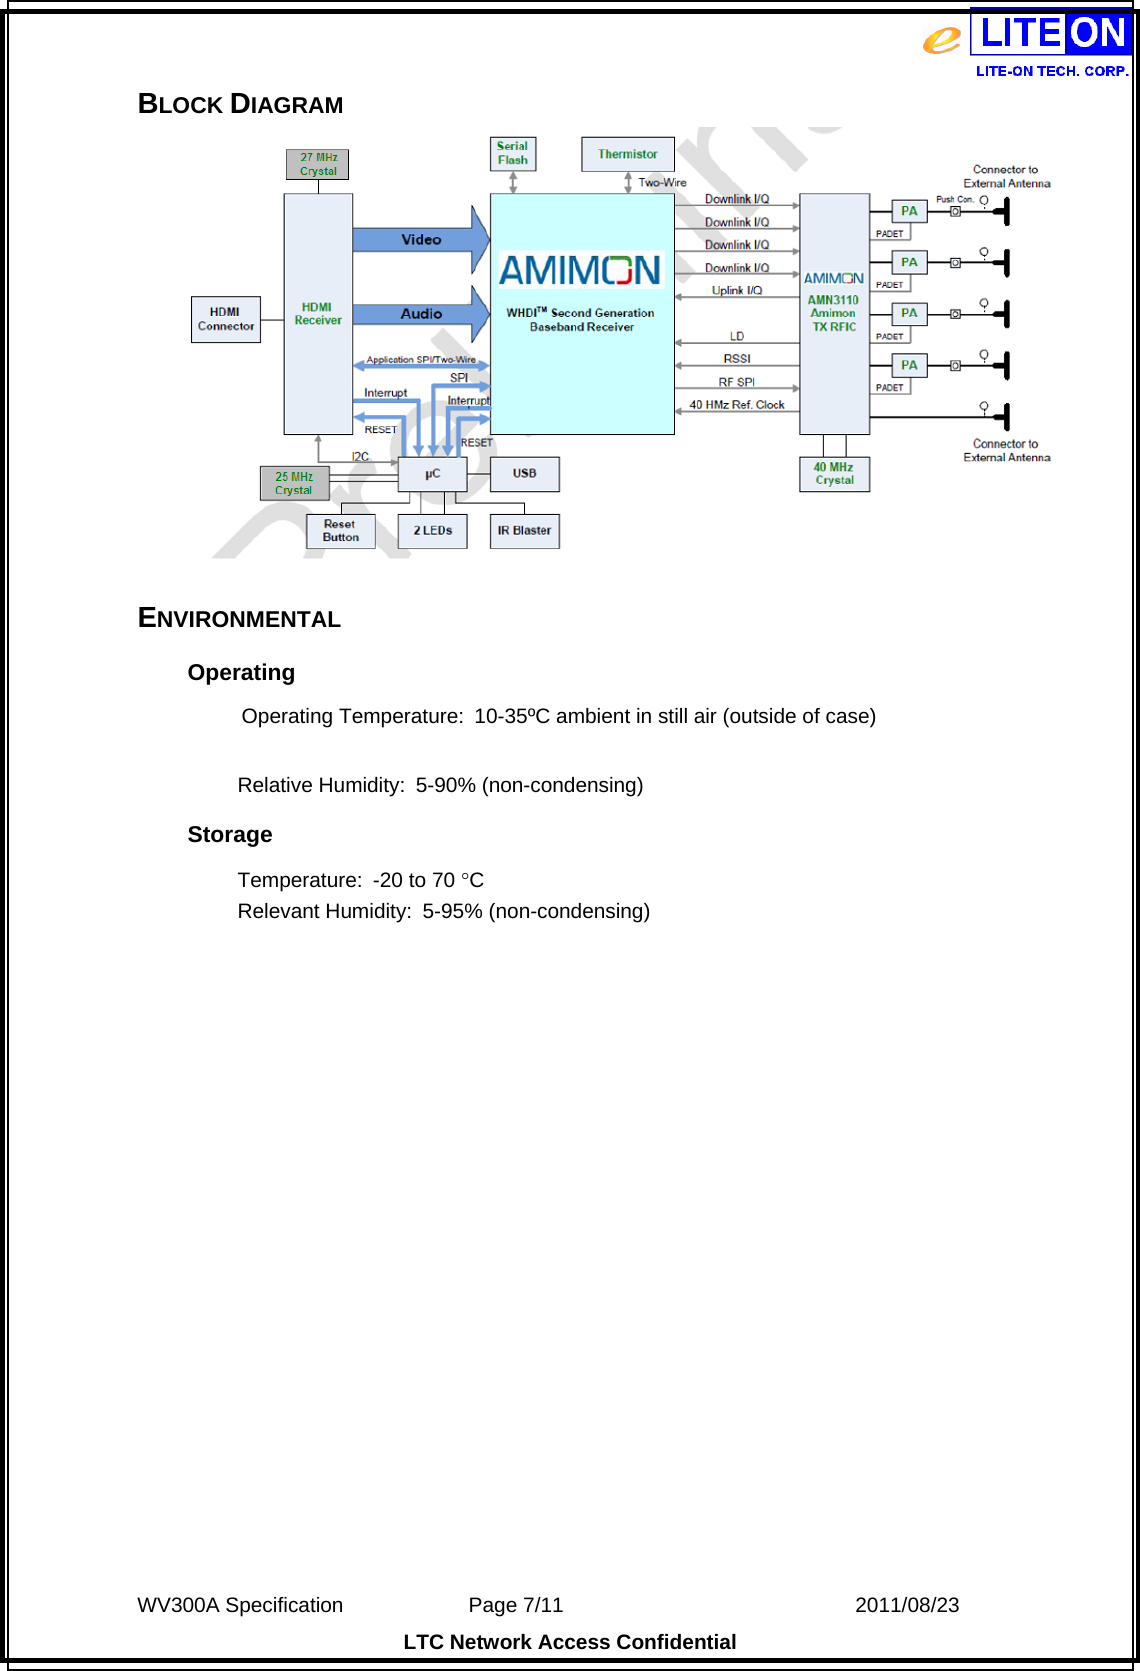  WV300A Specification             Page 7/11                            2011/08/23 LTC Network Access Confidential BLOCK DIAGRAM    ENVIRONMENTAL Operating           Operating Temperature: 10-35ºC ambient in still air (outside of case)  Relative Humidity:  5-90% (non-condensing) Storage Temperature:  -20 to 70 C Relevant Humidity:  5-95% (non-condensing)                      